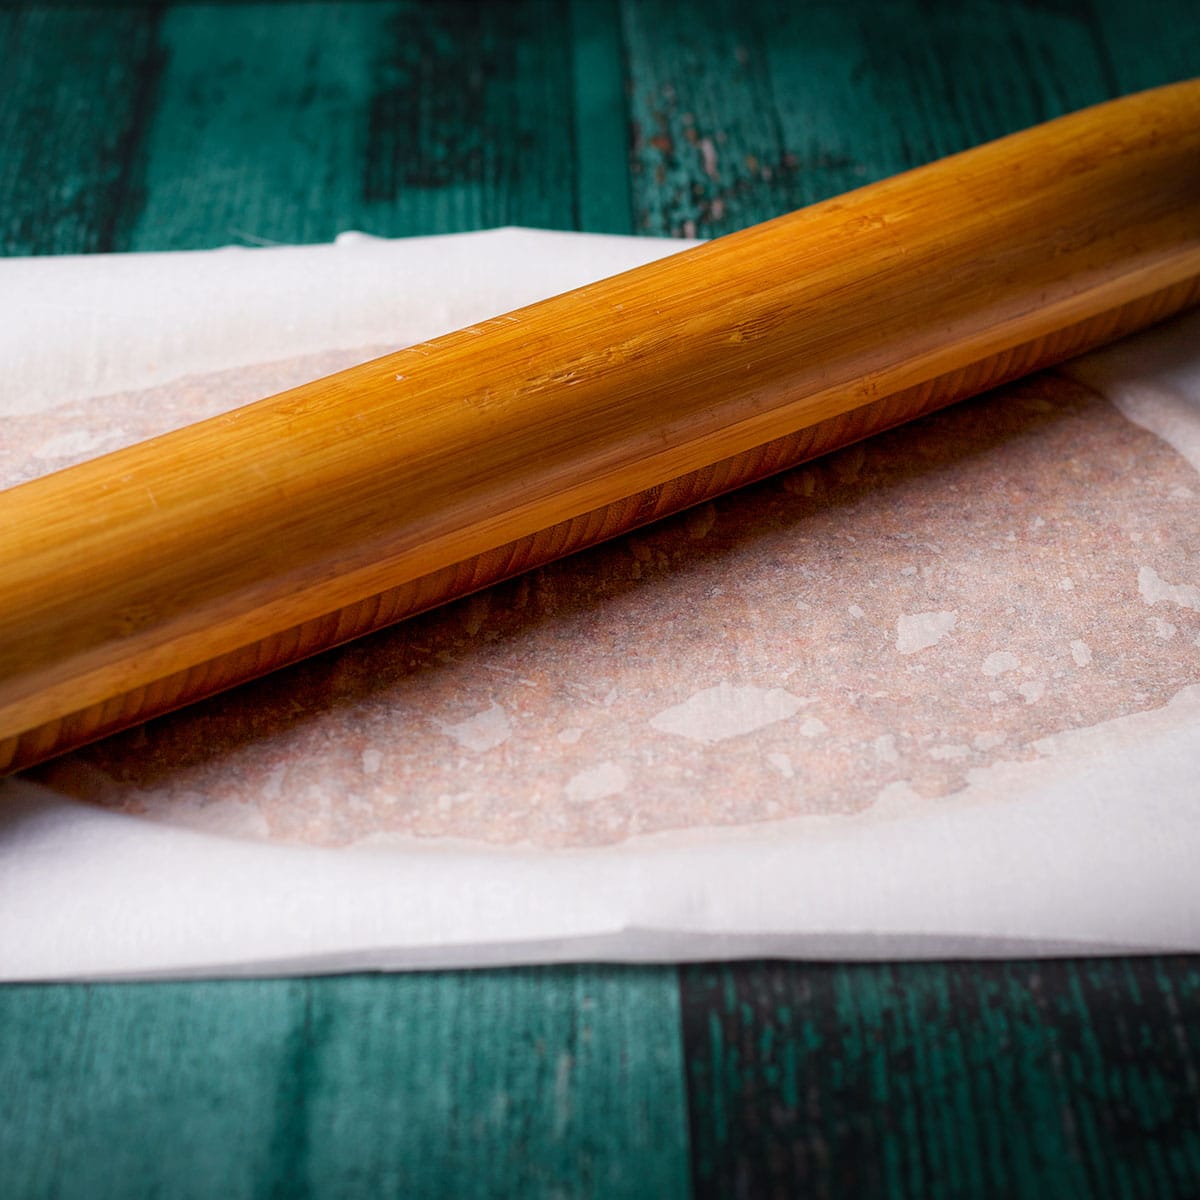 Using a rolling pin to roll cracker dough out into a thin sheet.